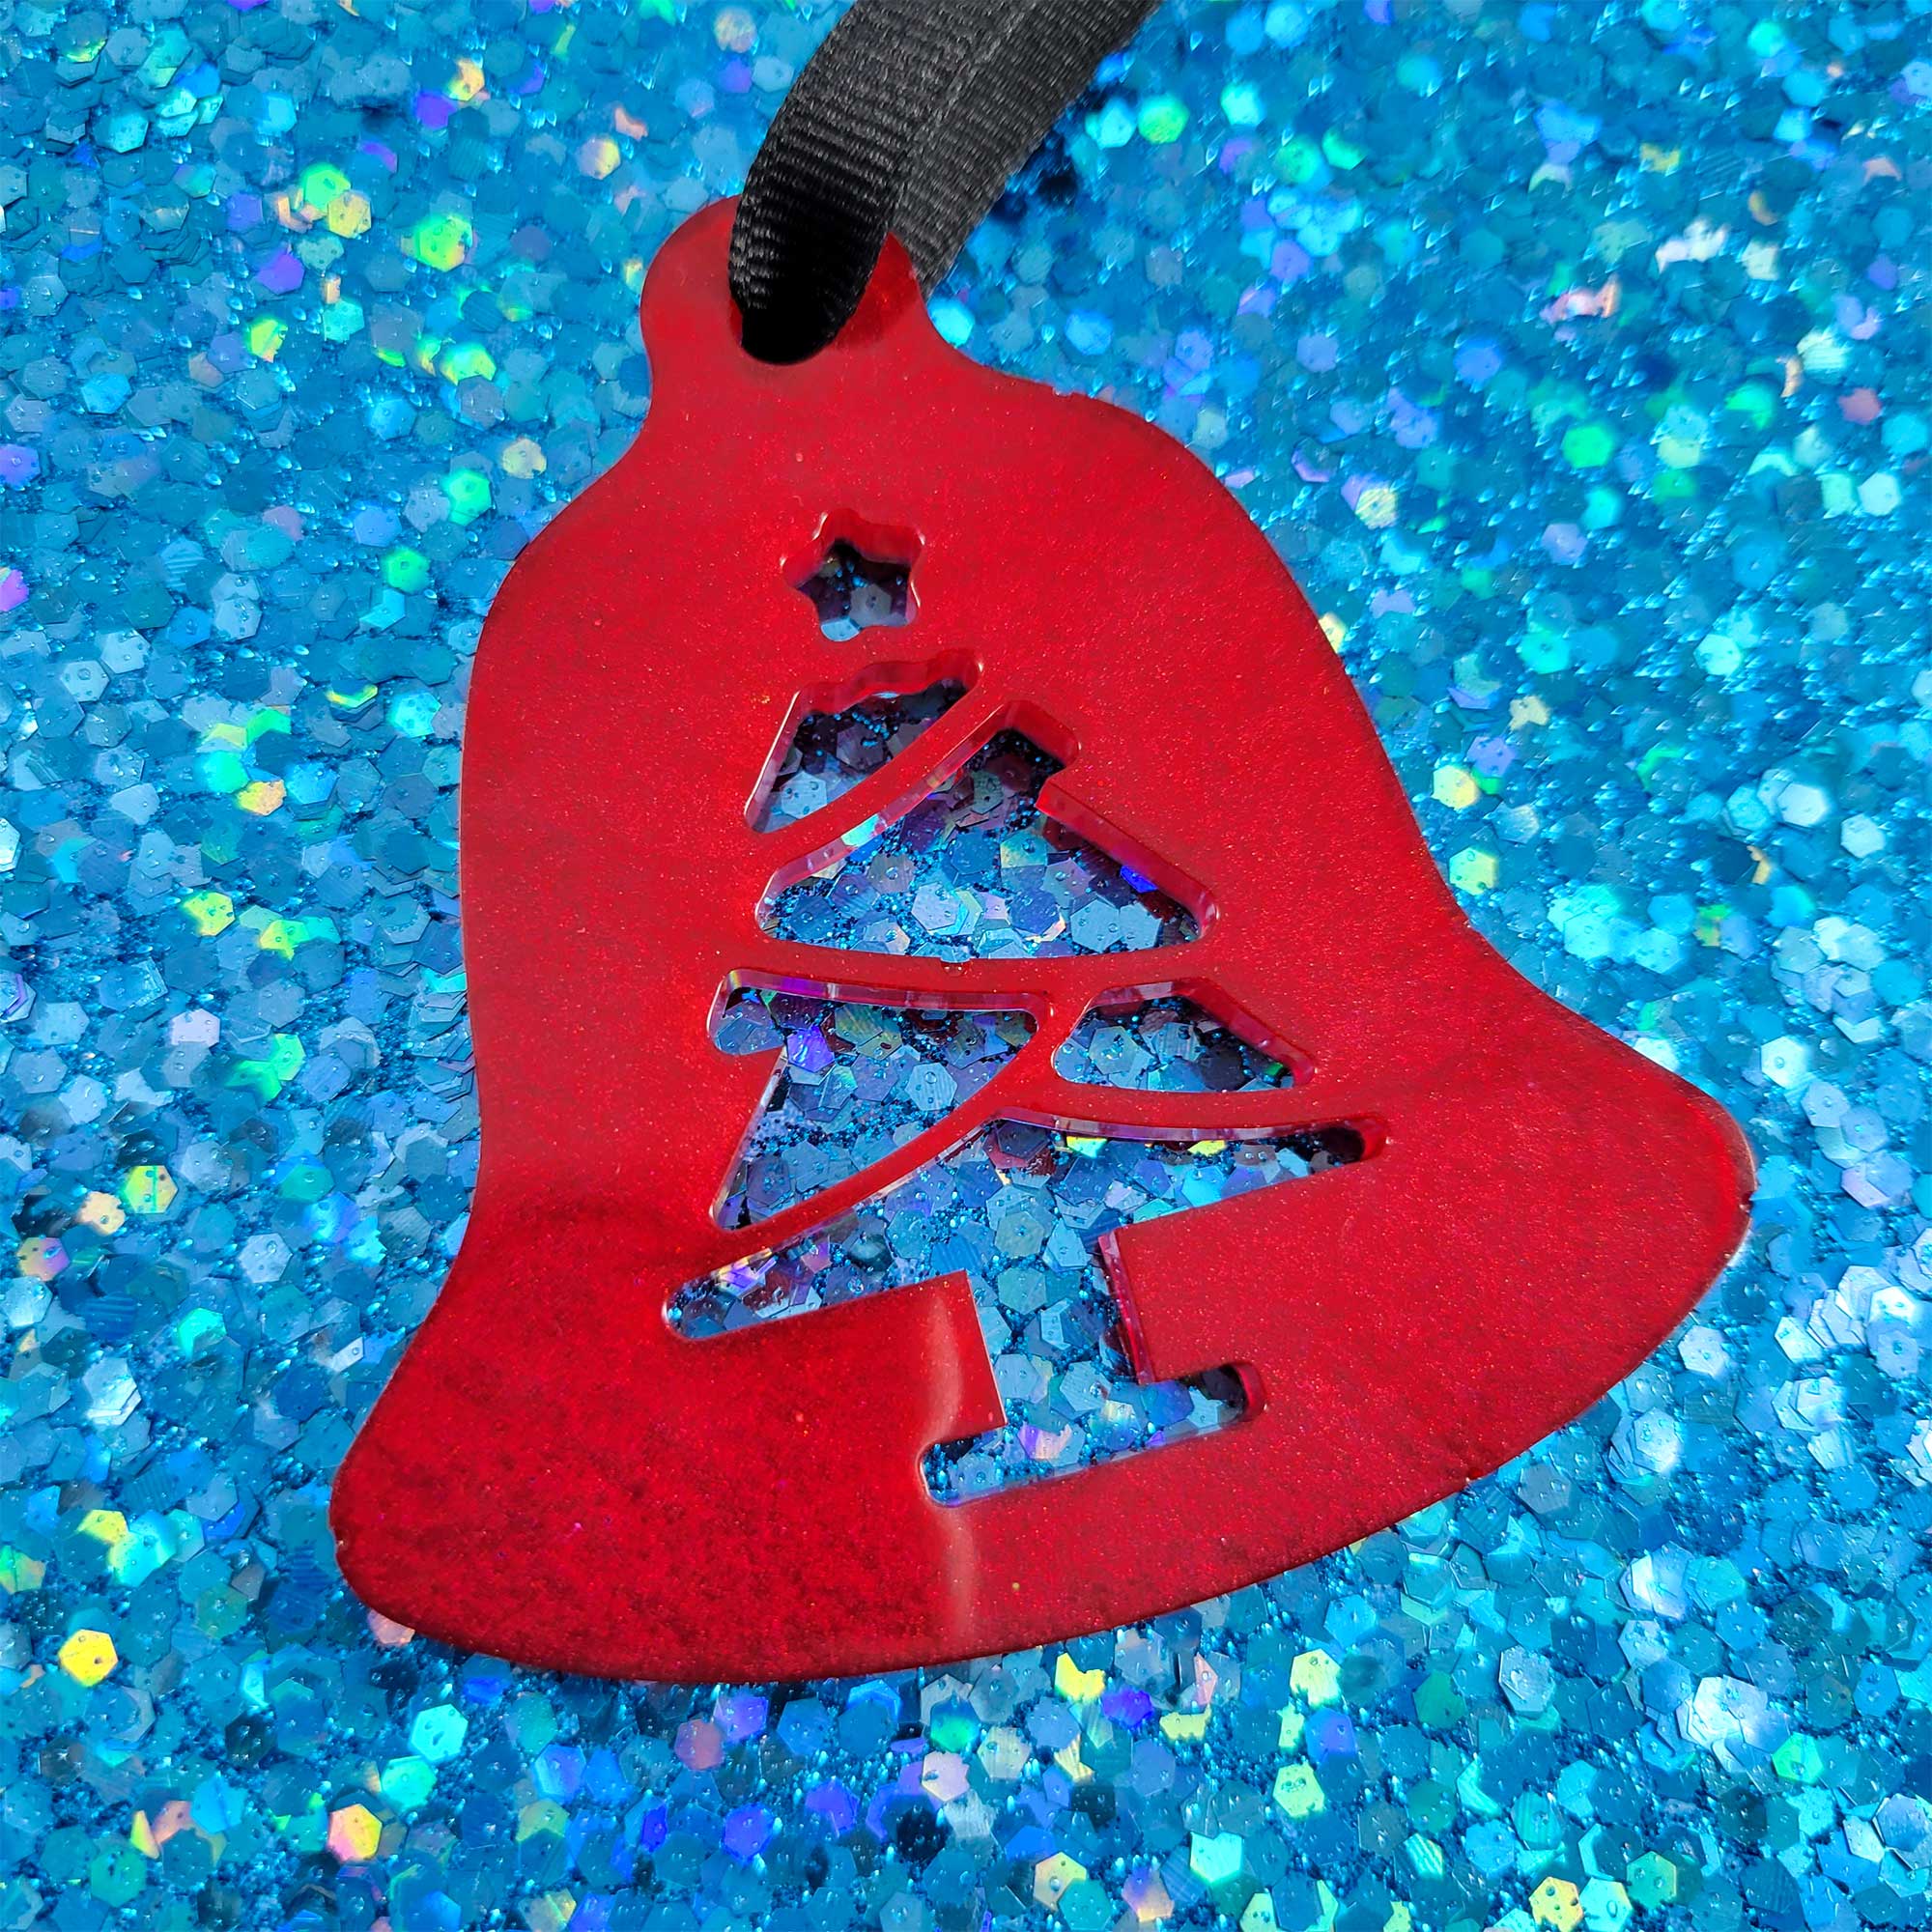 Red Bell Christmas Tree Ornament by Wilde Designs